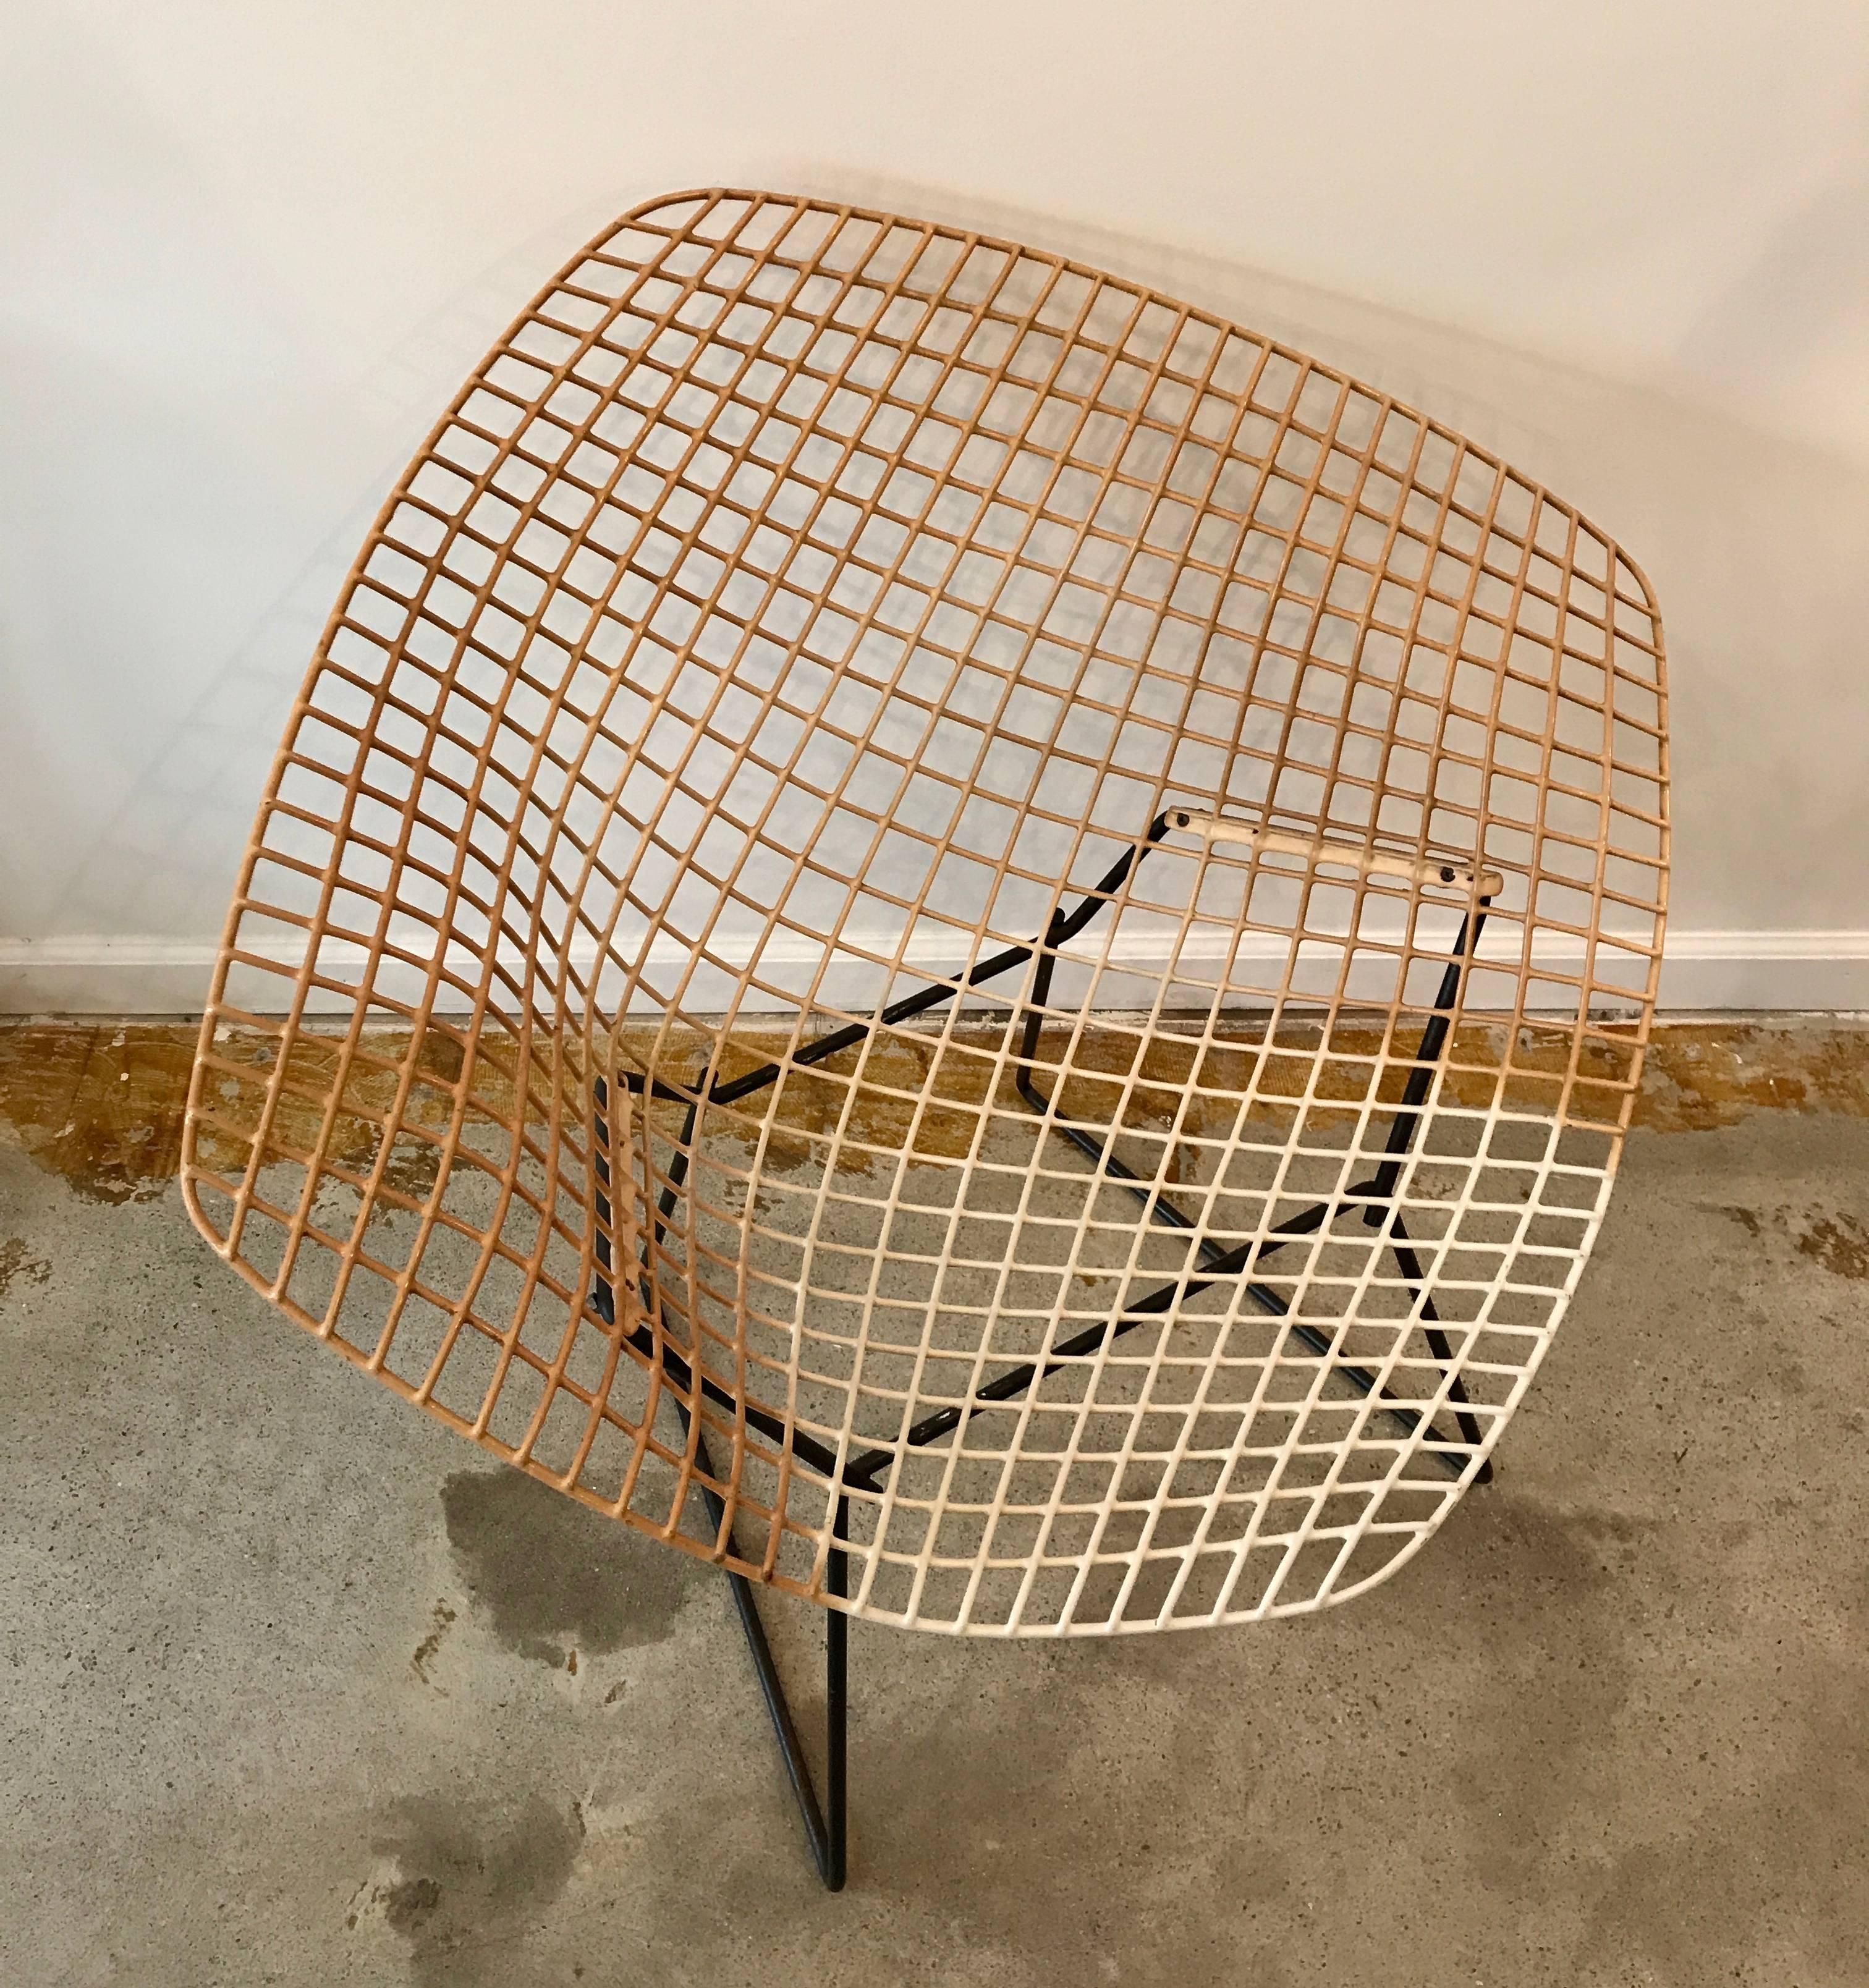 Original diamond chair by Harry Bertoia for Knoll International. Coated metal diamond shell with black metal frame. The coating was originally white but has faded and darkened over the years with the exception of where the seat cushion was